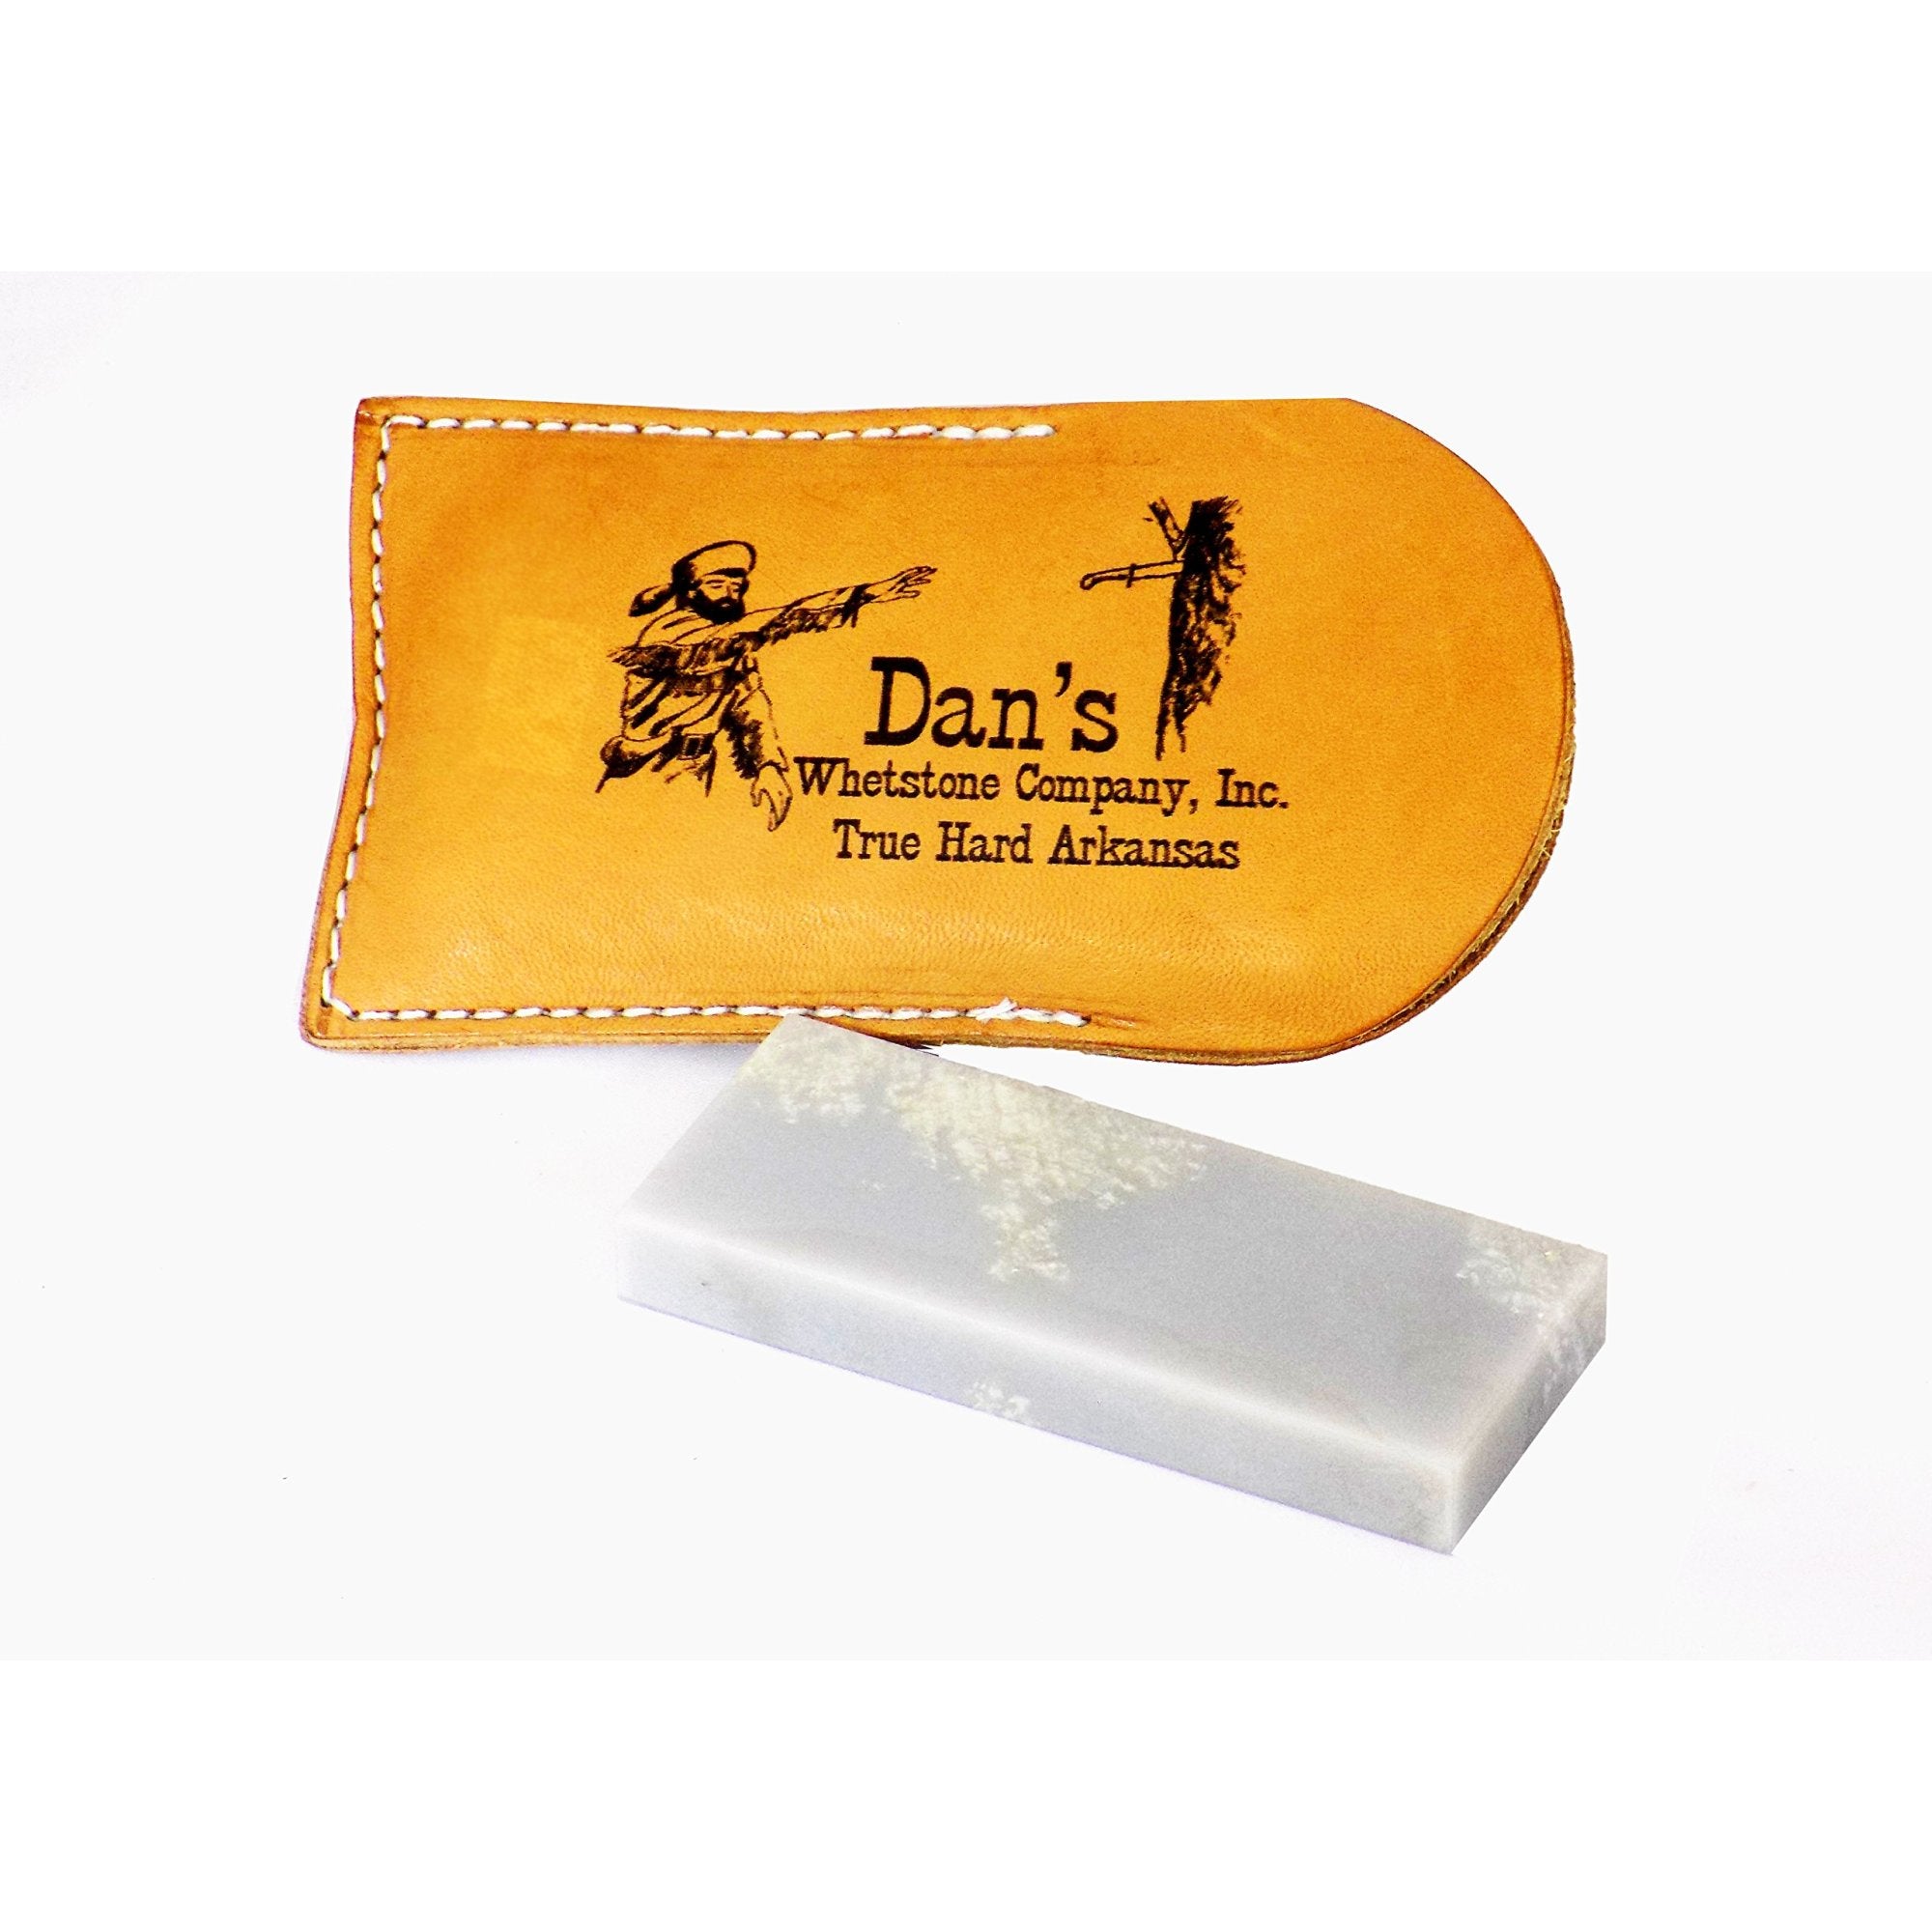 Buy Dans Genuine Arkansas True Hard Pocket Knife Blade Sharpening Stone  Whetstone 4 x 1 5/8 x 1/2 in Leather Pouch XAP-42-L at Prime Tools for  only $ 30.95